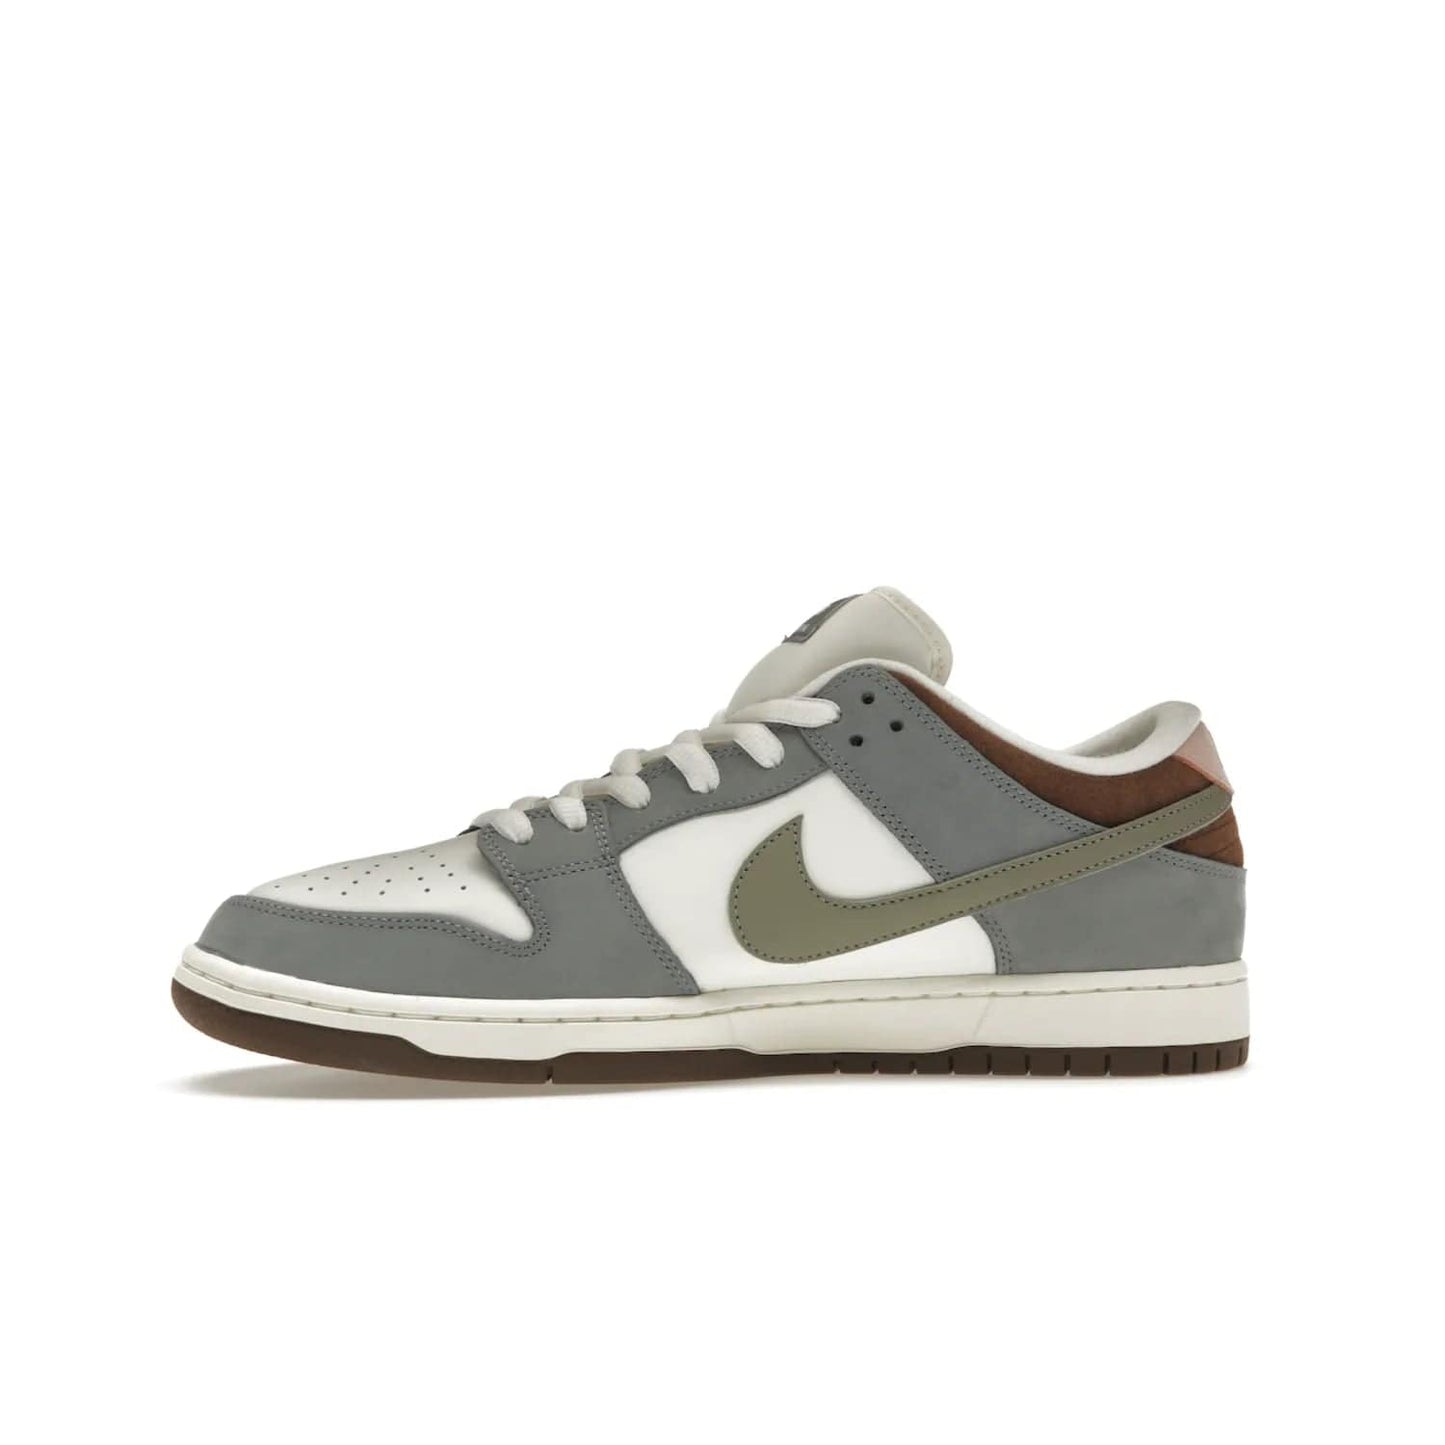 Nike SB Dunk Low Yuto Horigome - Image 18 - Only at www.BallersClubKickz.com - Introducing the Nike SB Dunk Low Yuto Horigome! Co-designed with the skater himself, it features Wolf Grey, Iron Grey, and Sail accents. Comfort and style for everyday wear, plus perfect for skate sessions. Get yours August 29, 2023!